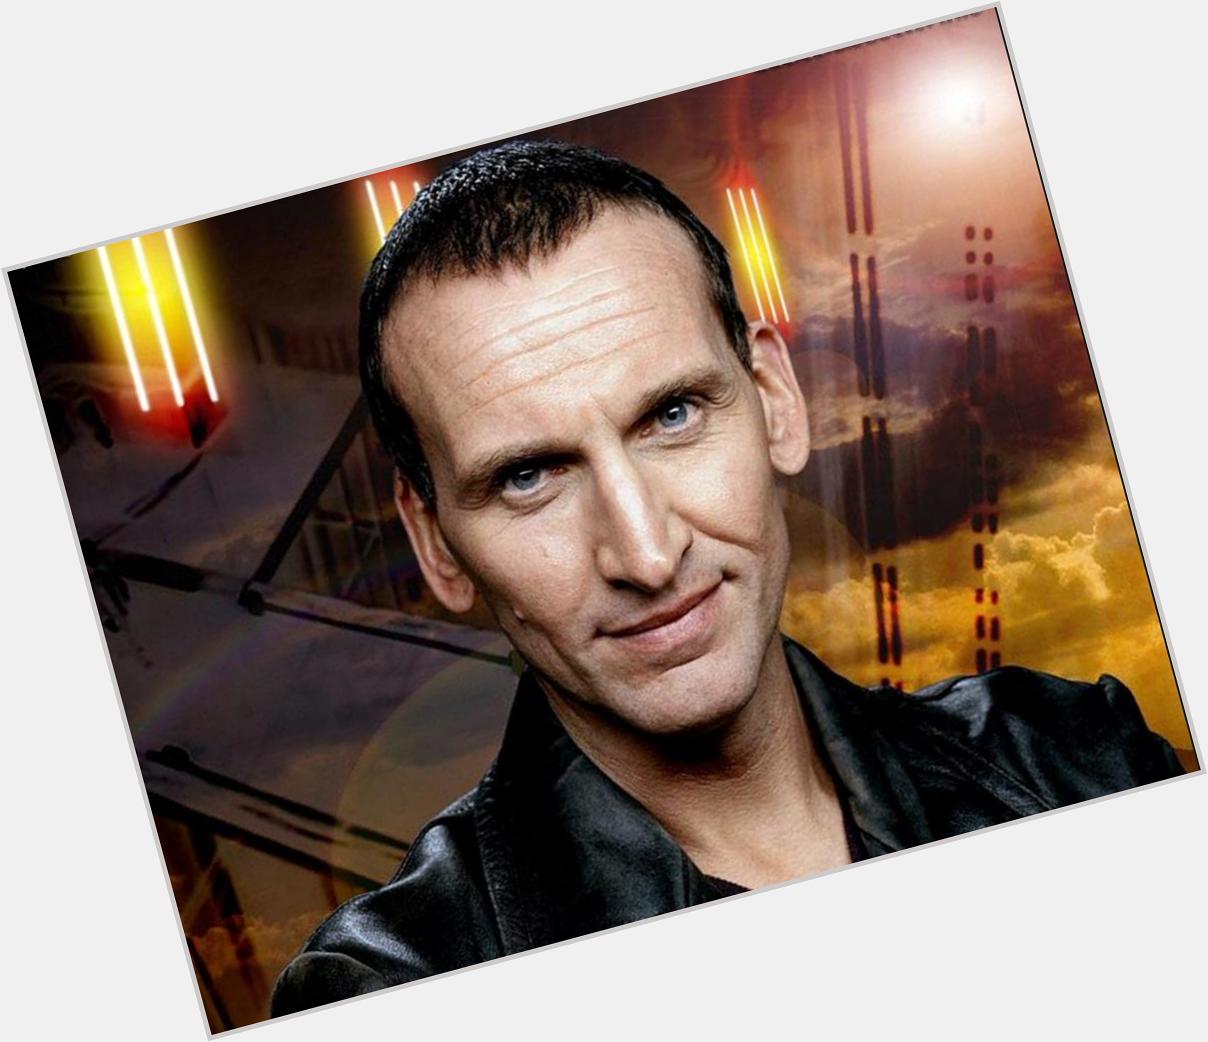 Happy 51st birthday Christopher Eccleston. You were my first doctor. 